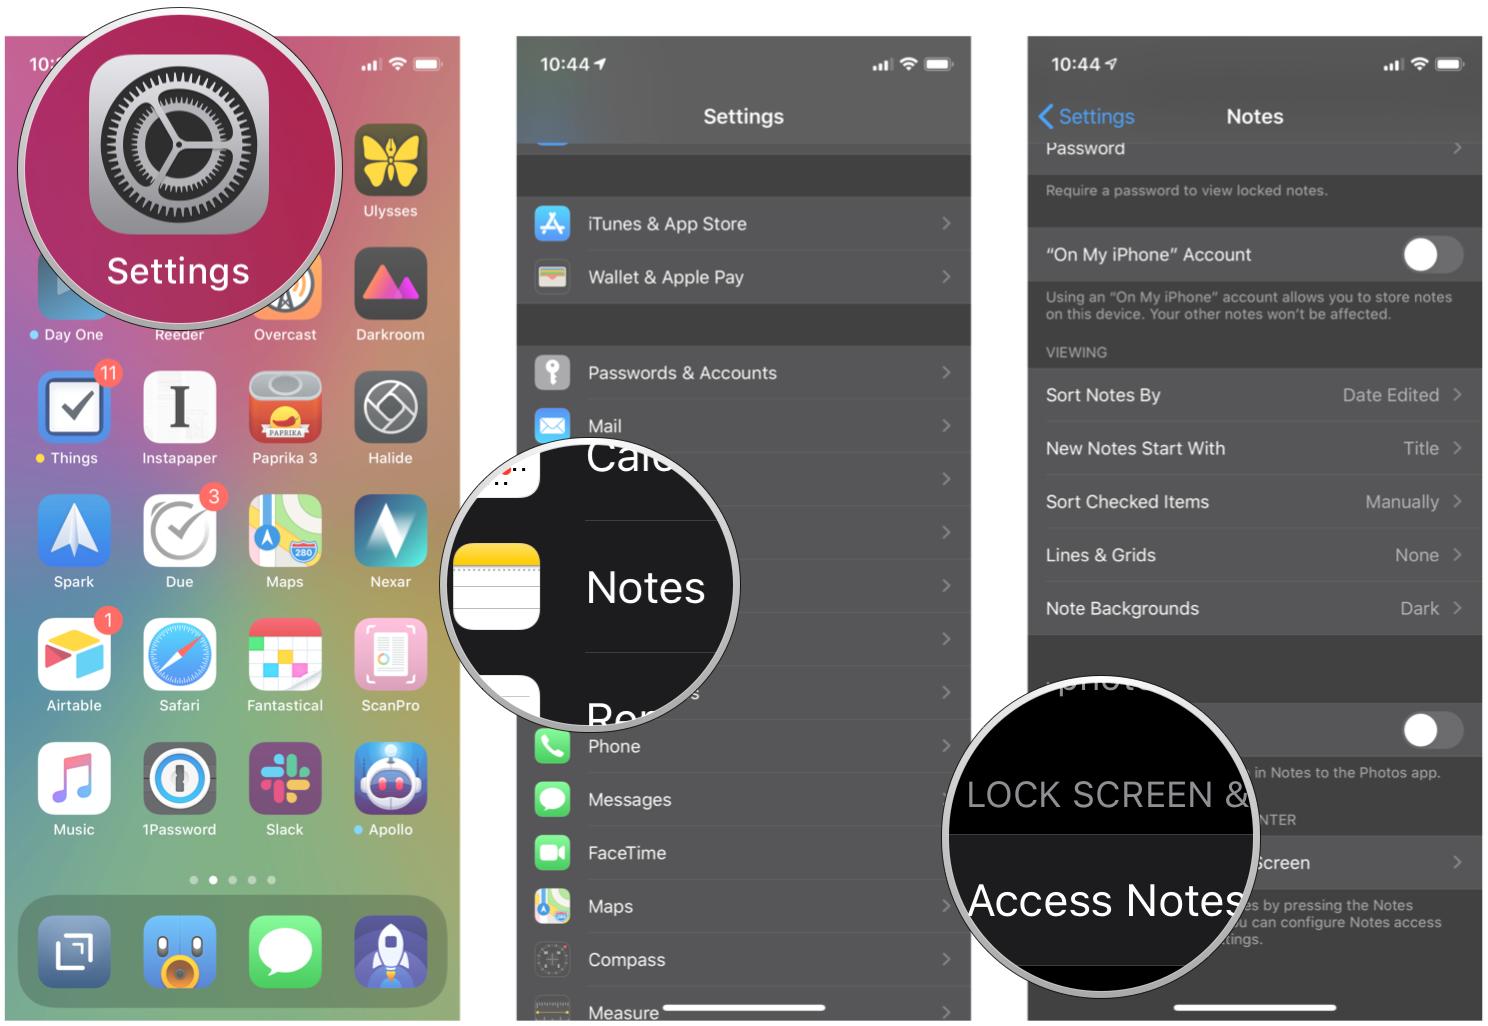 Customize how long a recently added note is accessible from the Lock Screen on iPhone and iPad by showing steps: Launch Settings, tap Notes, tap Access Notes from Lock Screen